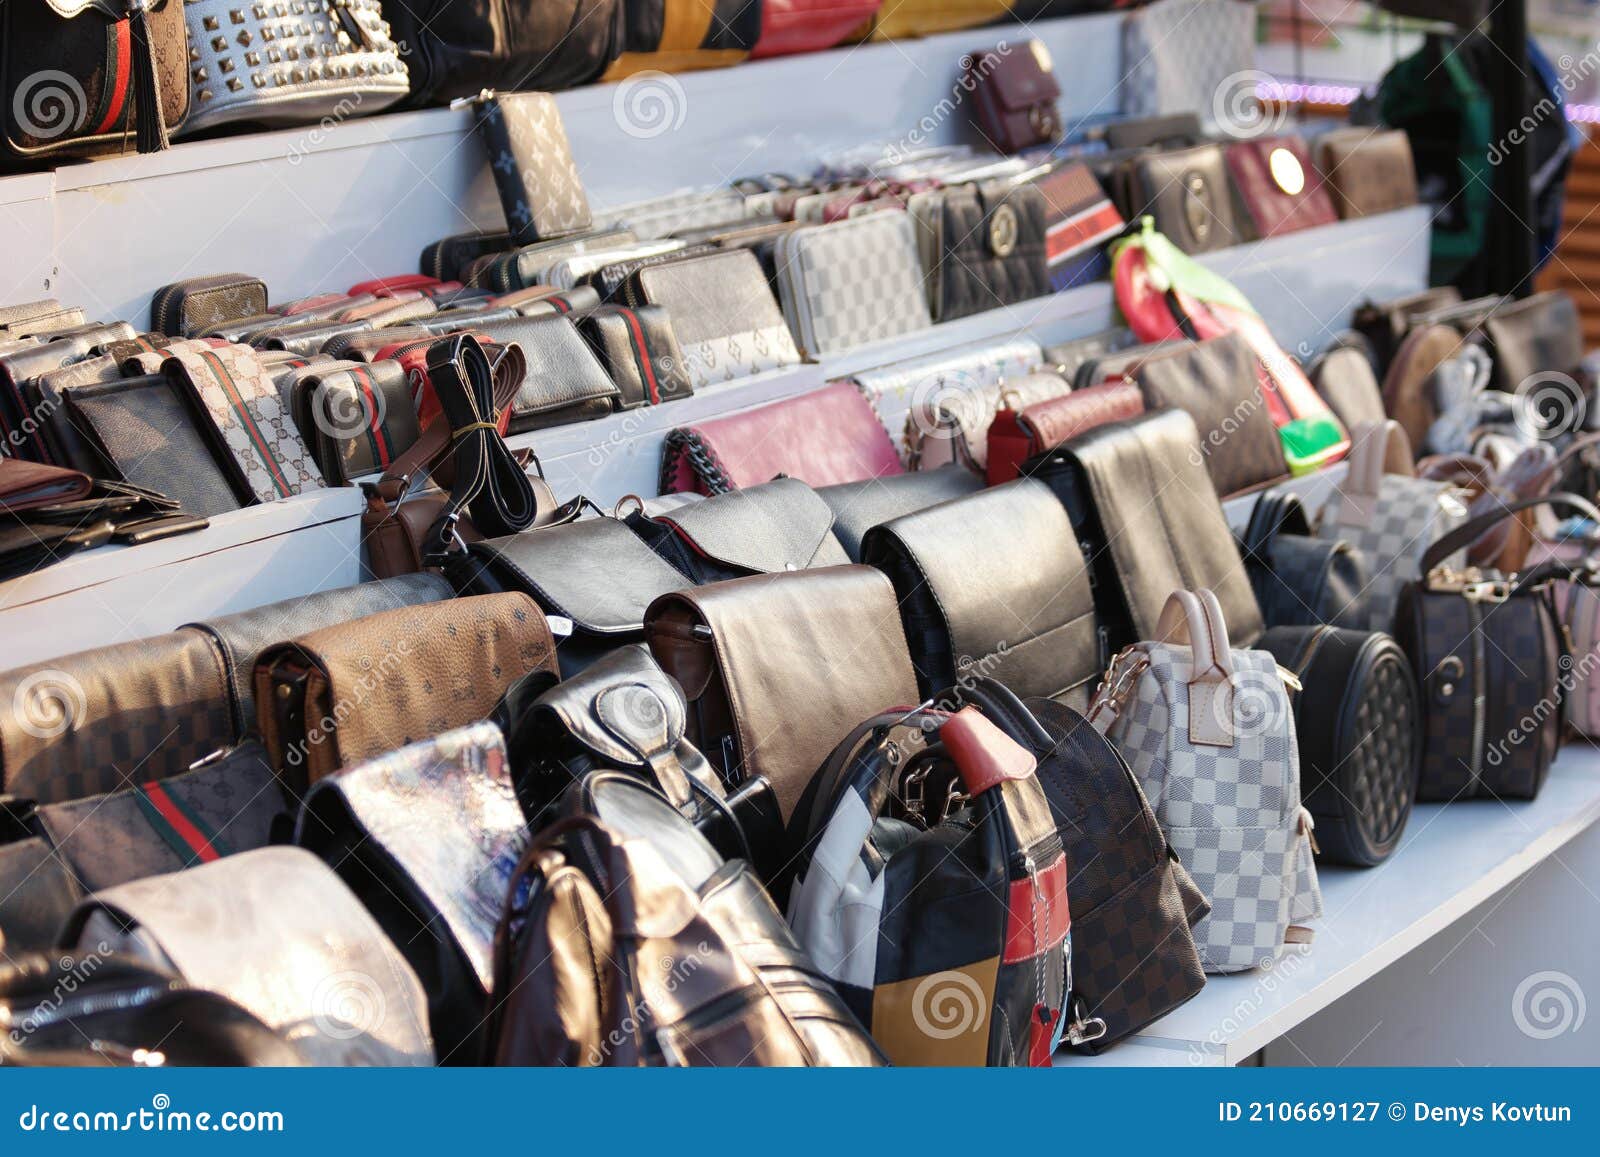 Showcase with Fake Handbags of Famous Brands. Stock Image - Image